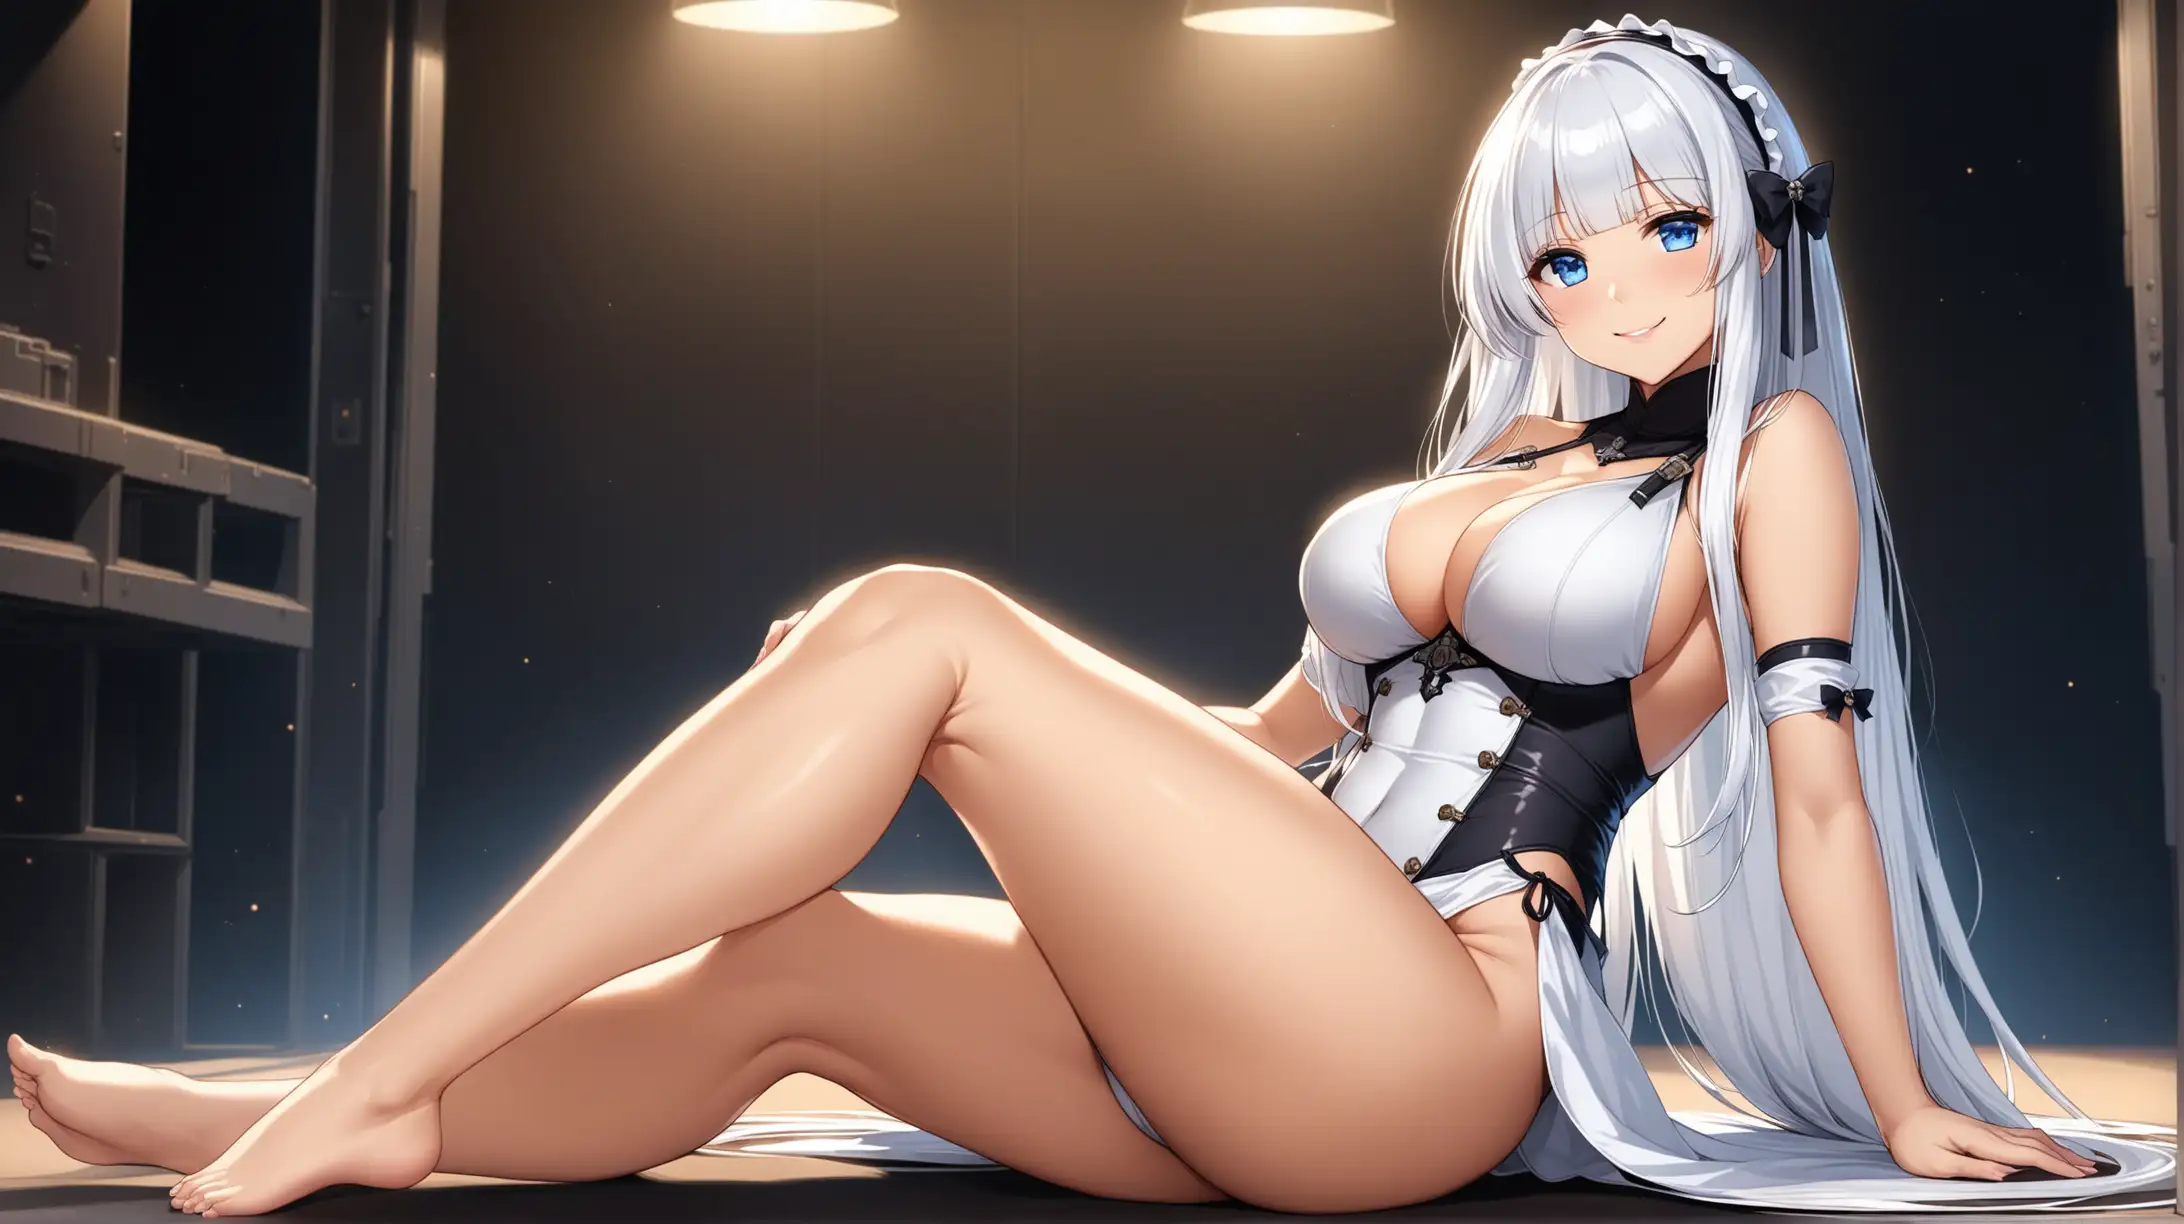 Seductive Illustrious from Azur Lane in Falloutinspired Outfit